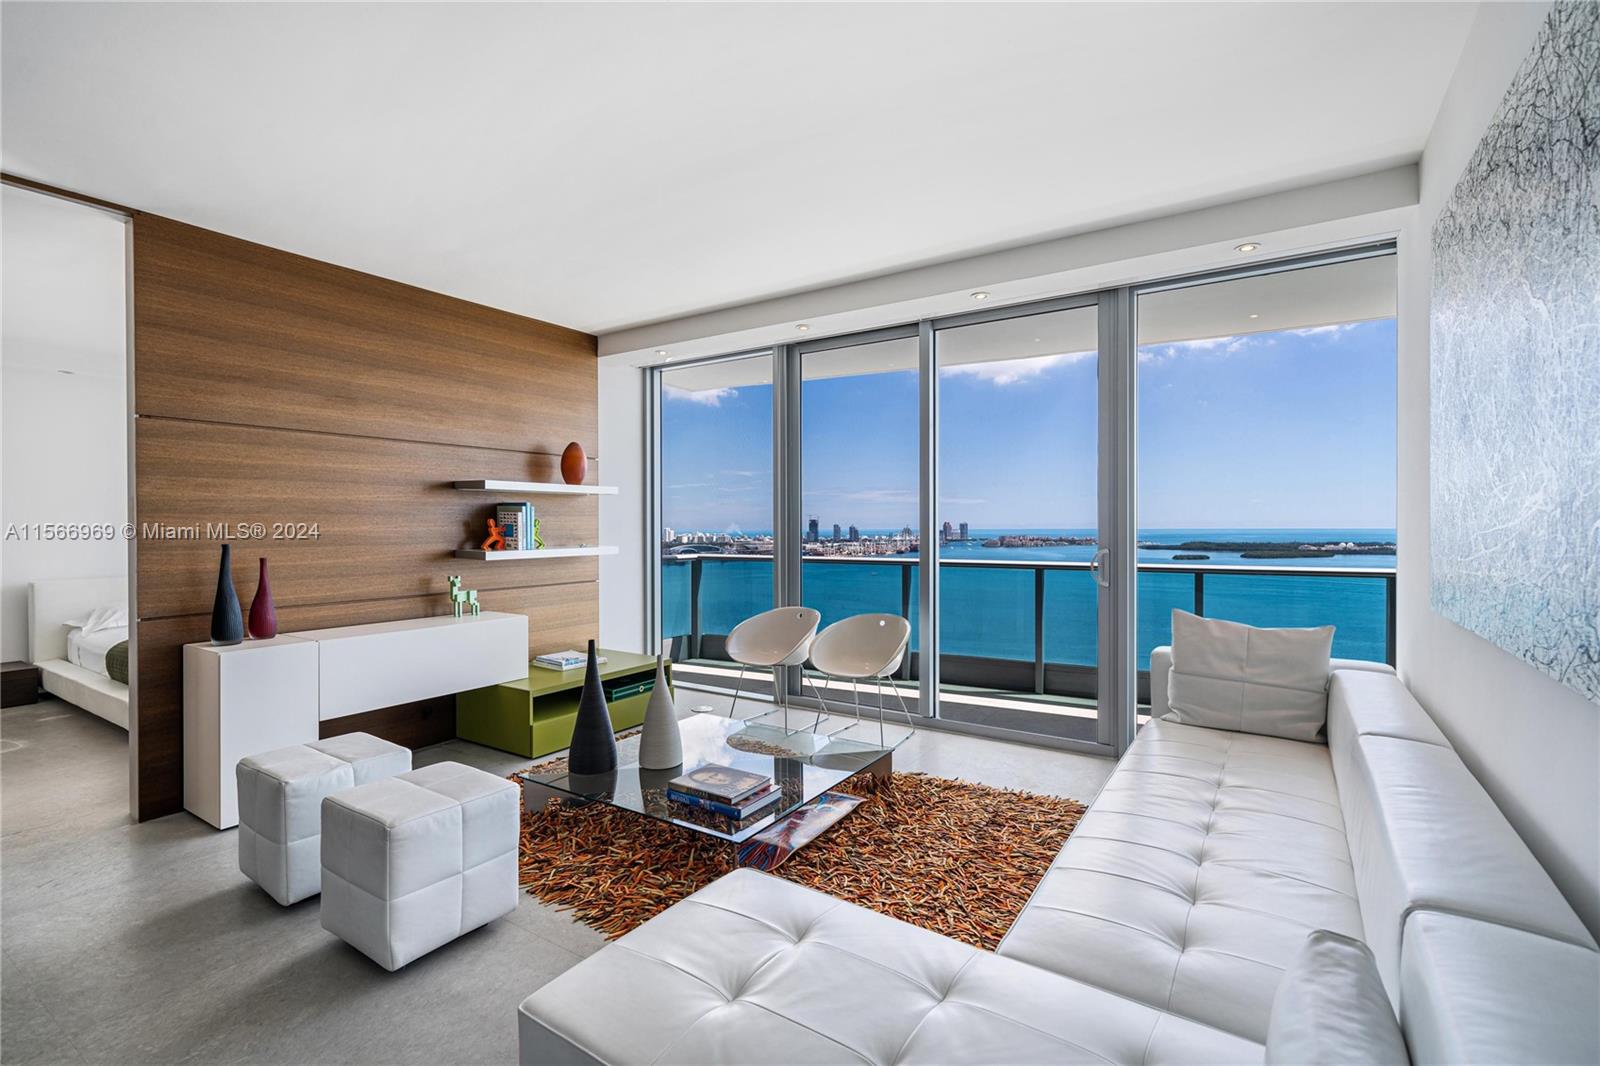 This 2-bedroom plus den/3-bathroom unit on the 40th floor is move-in ready and truly stunning. It's fully furnished
and offers 1,730 square feet of living space, including a spacious terrace with panoramic sunrise views spanning
Biscayne Bay, Key Biscayne, Miami Beach, the Atlantic Ocean, and Miami itself. Inside, you'll find beautiful stone
floors, open living and dining areas, and a sleek gourmet kitchen equipped with top-of-the-line appliances, all with
incredible views. The bayside primary suite provides direct terrace access and features an exquisite bathroom with
marble floors and walls, dual sinks, a separate shower, and a spa tub. Additionally, Jade Brickell offers a wealth of
5-star amenities, including a 24-hour concierge, assigned parking, valet services.